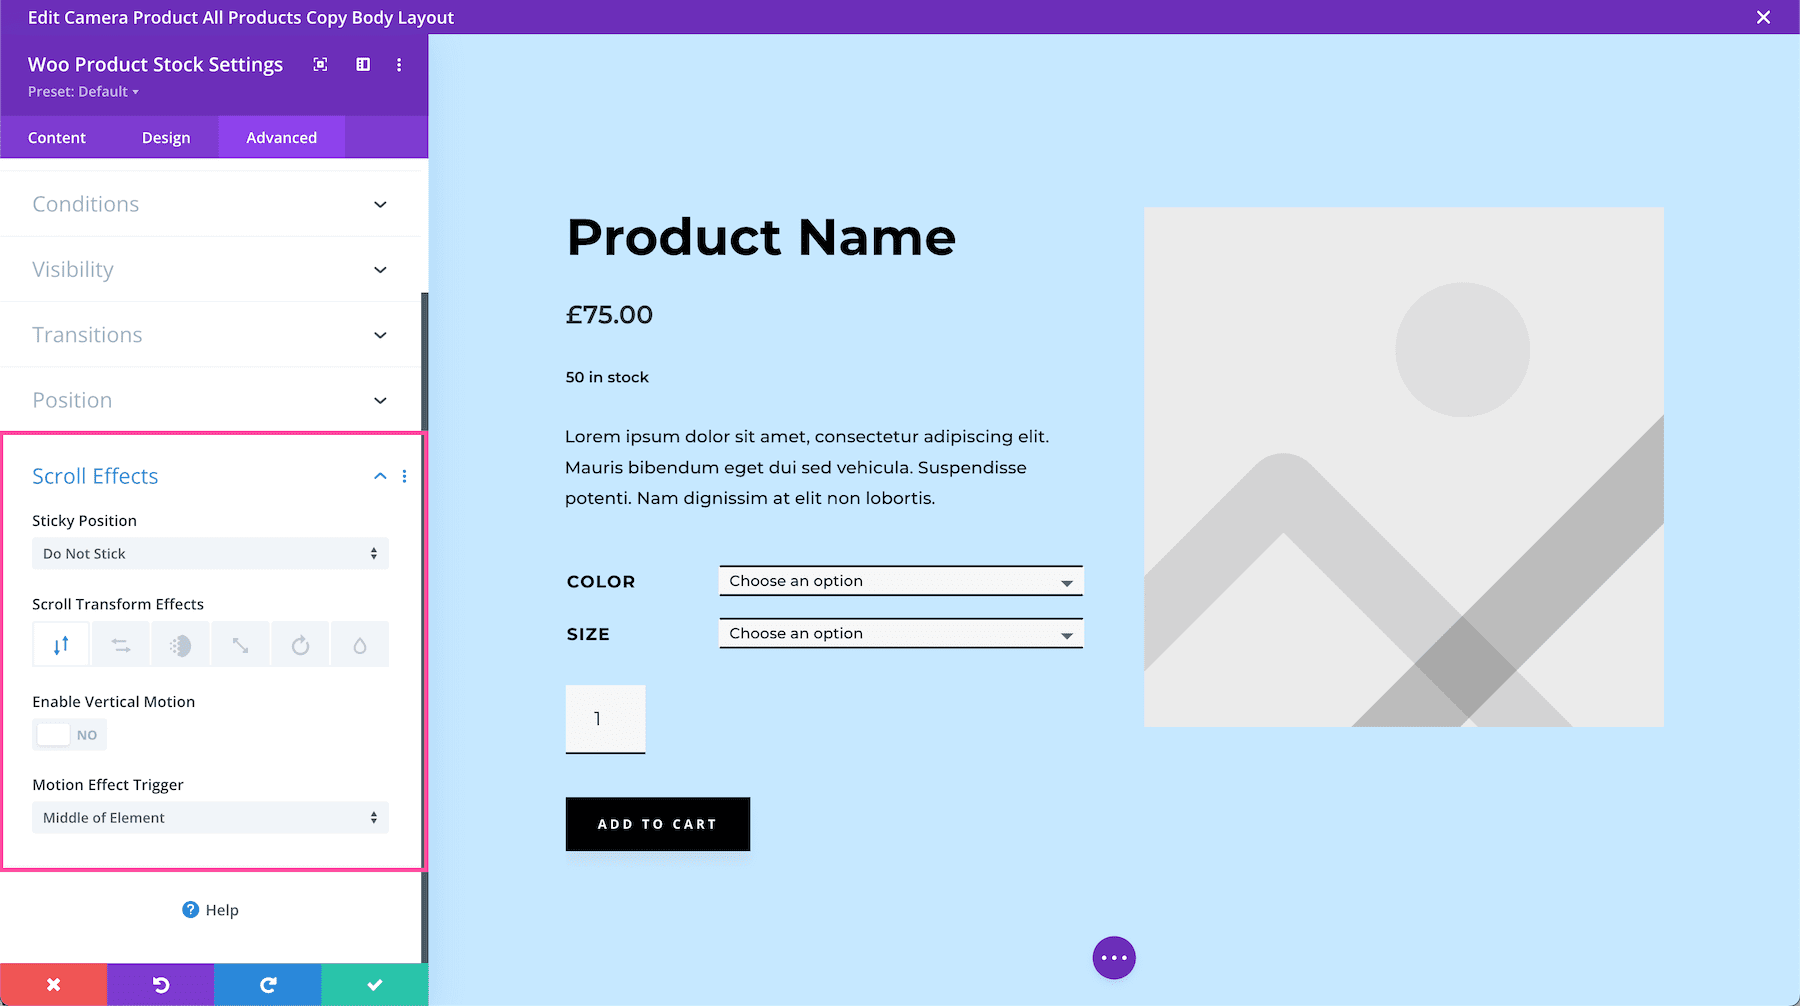 Scroll Effects for the Divi Woo Product Stock Module